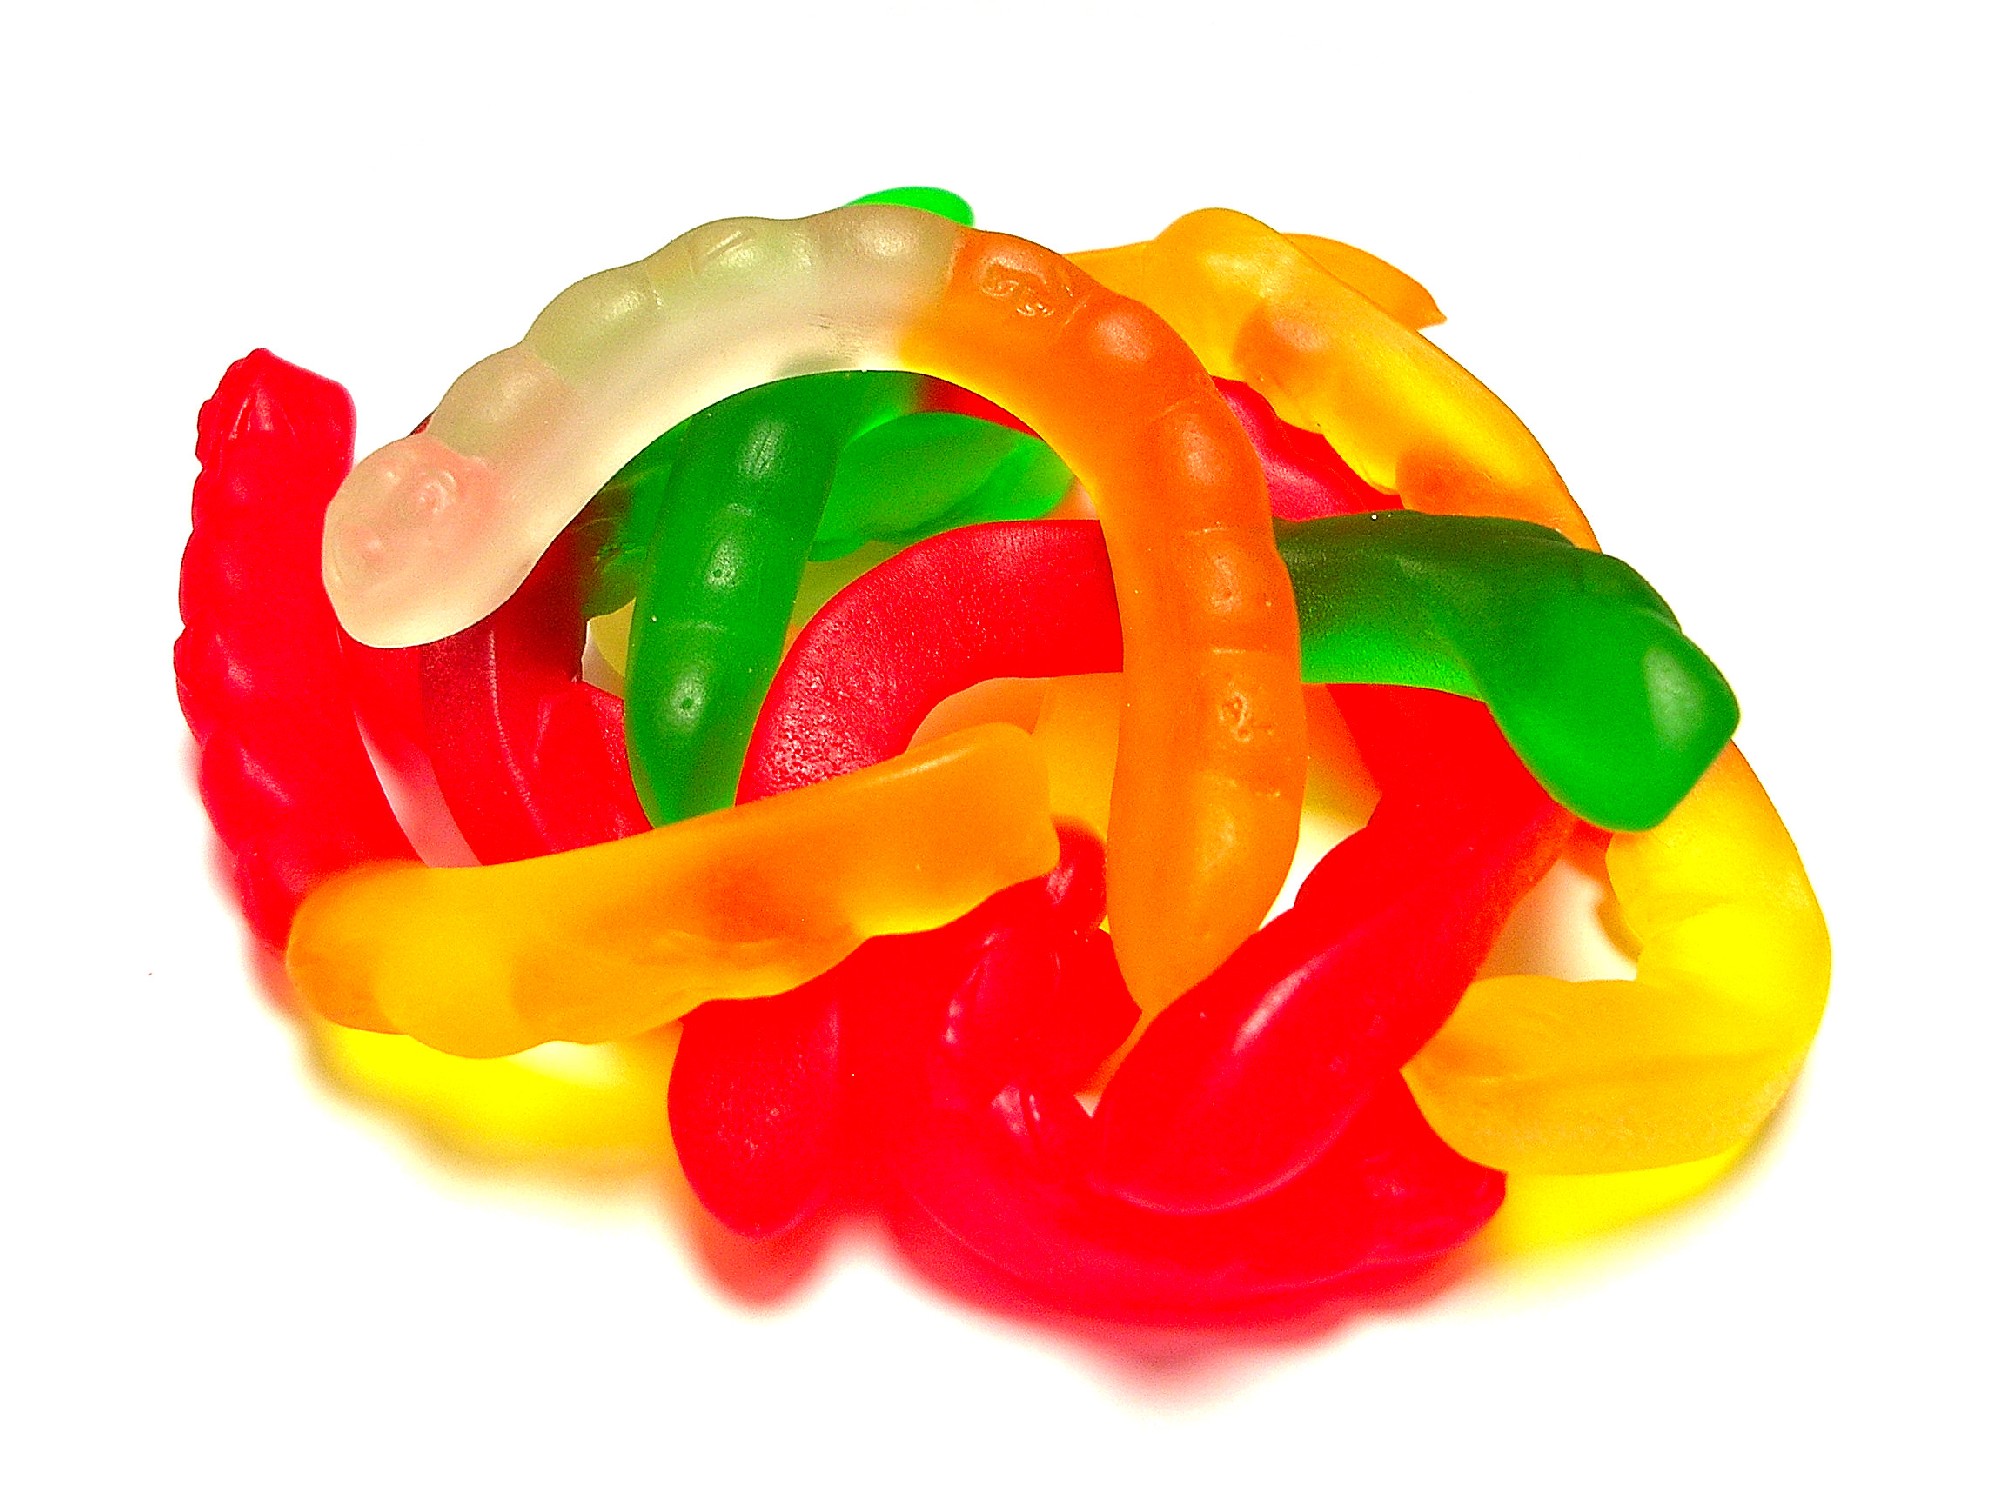 Gummy Worms drawing free image download